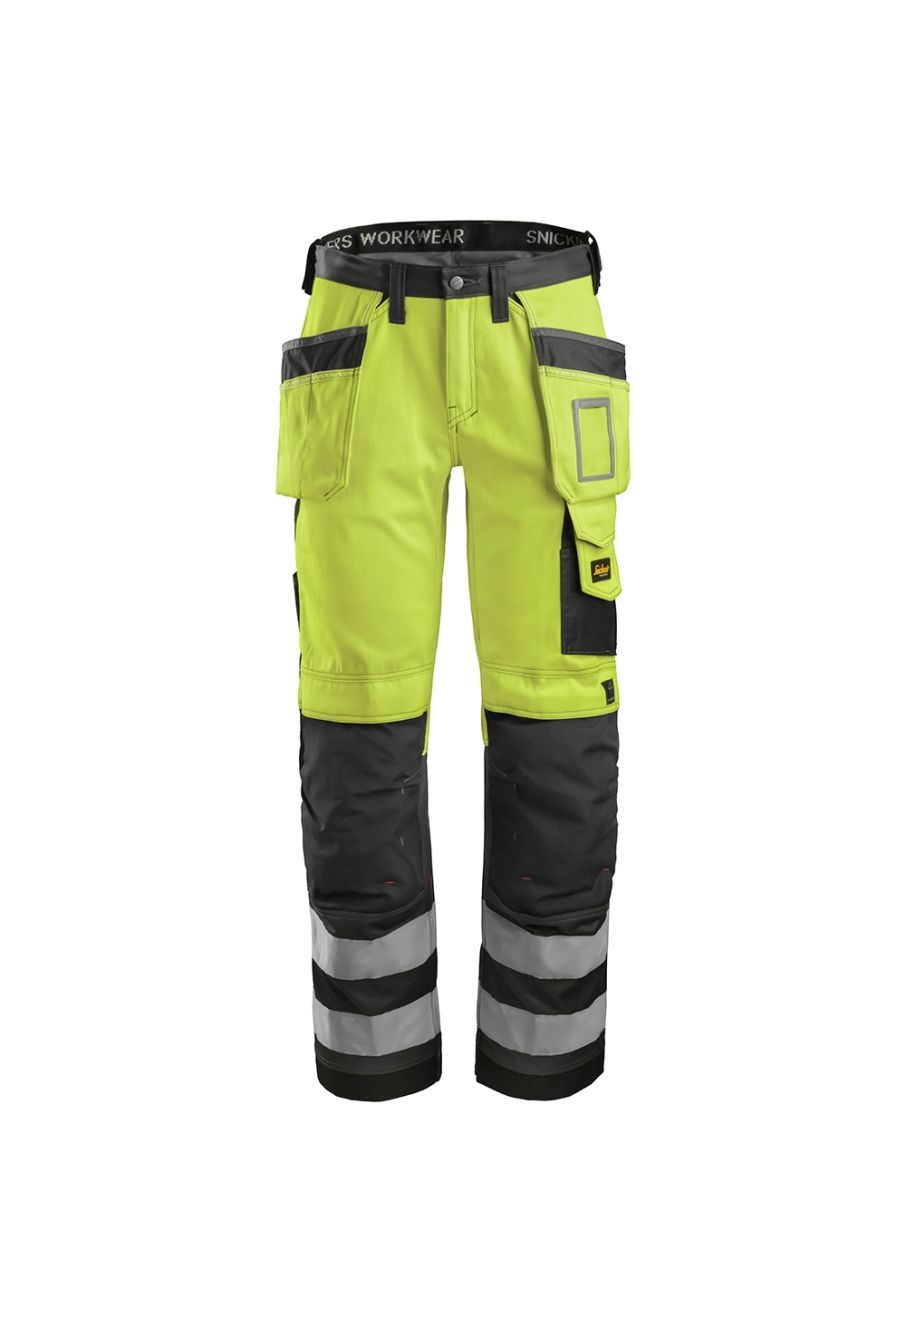 Snickers, Protective Workwear & Accessories